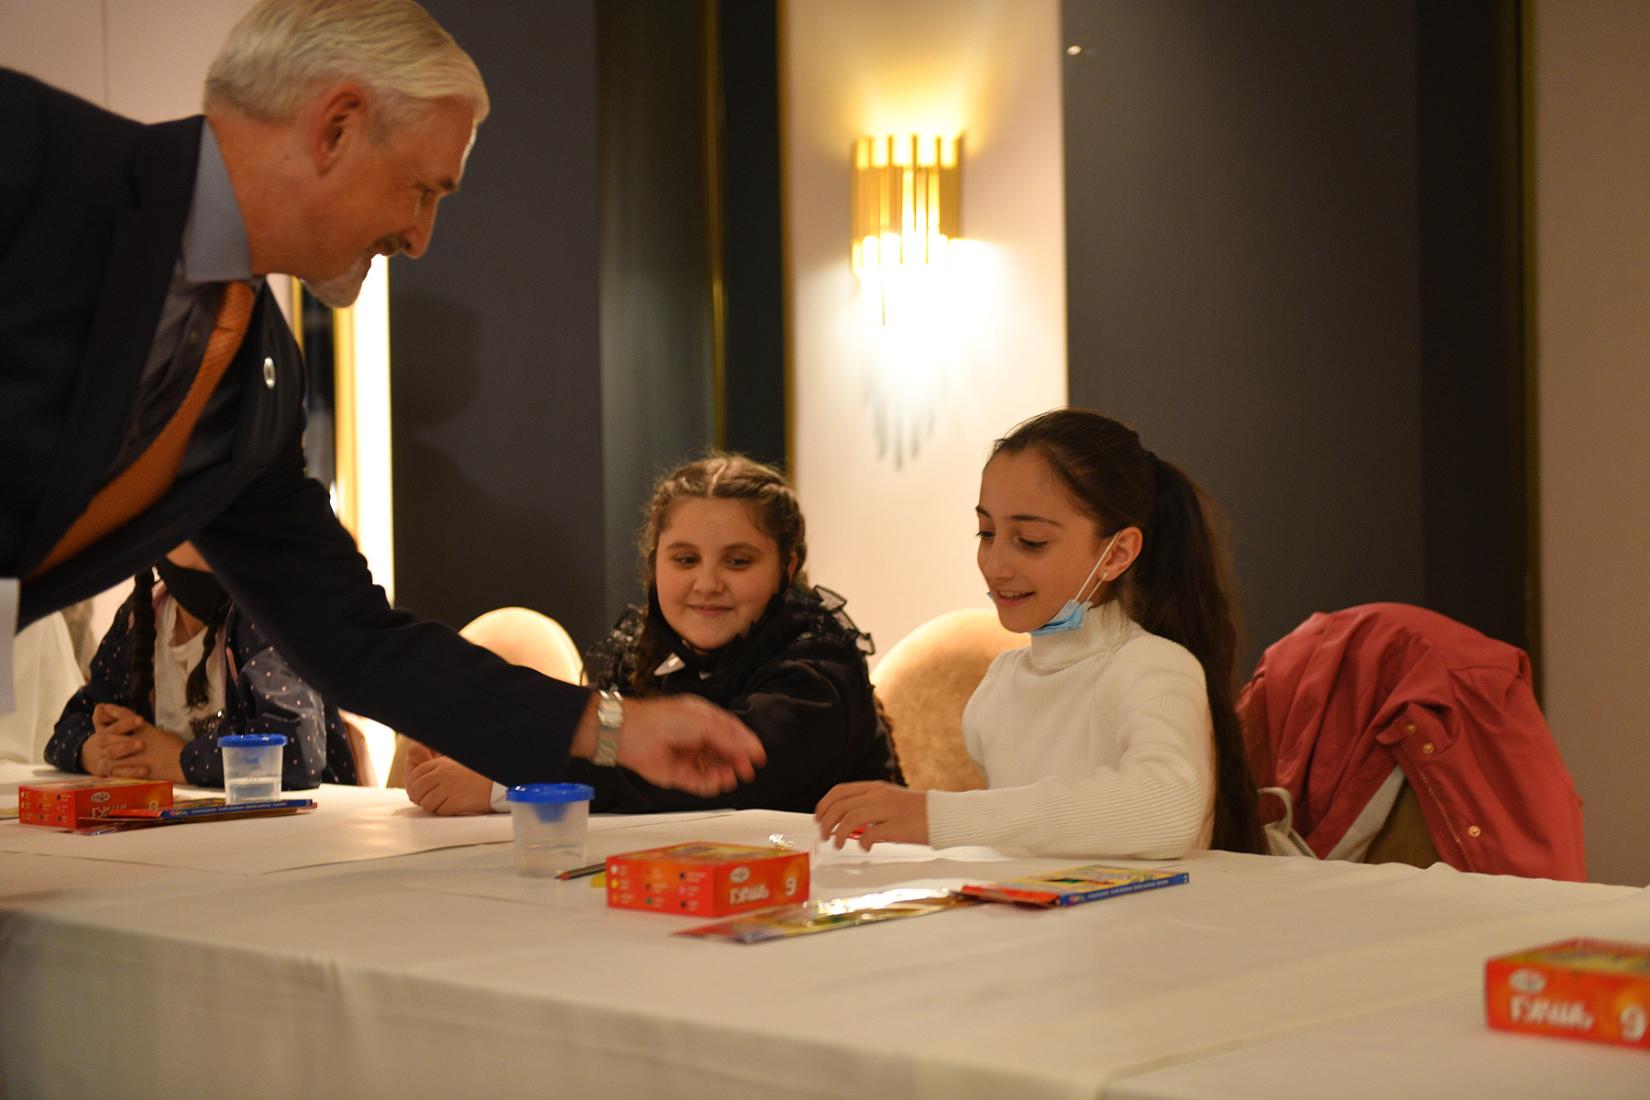 UN Resident Coordinator in Armenia gives a symbolic gift to a girl.